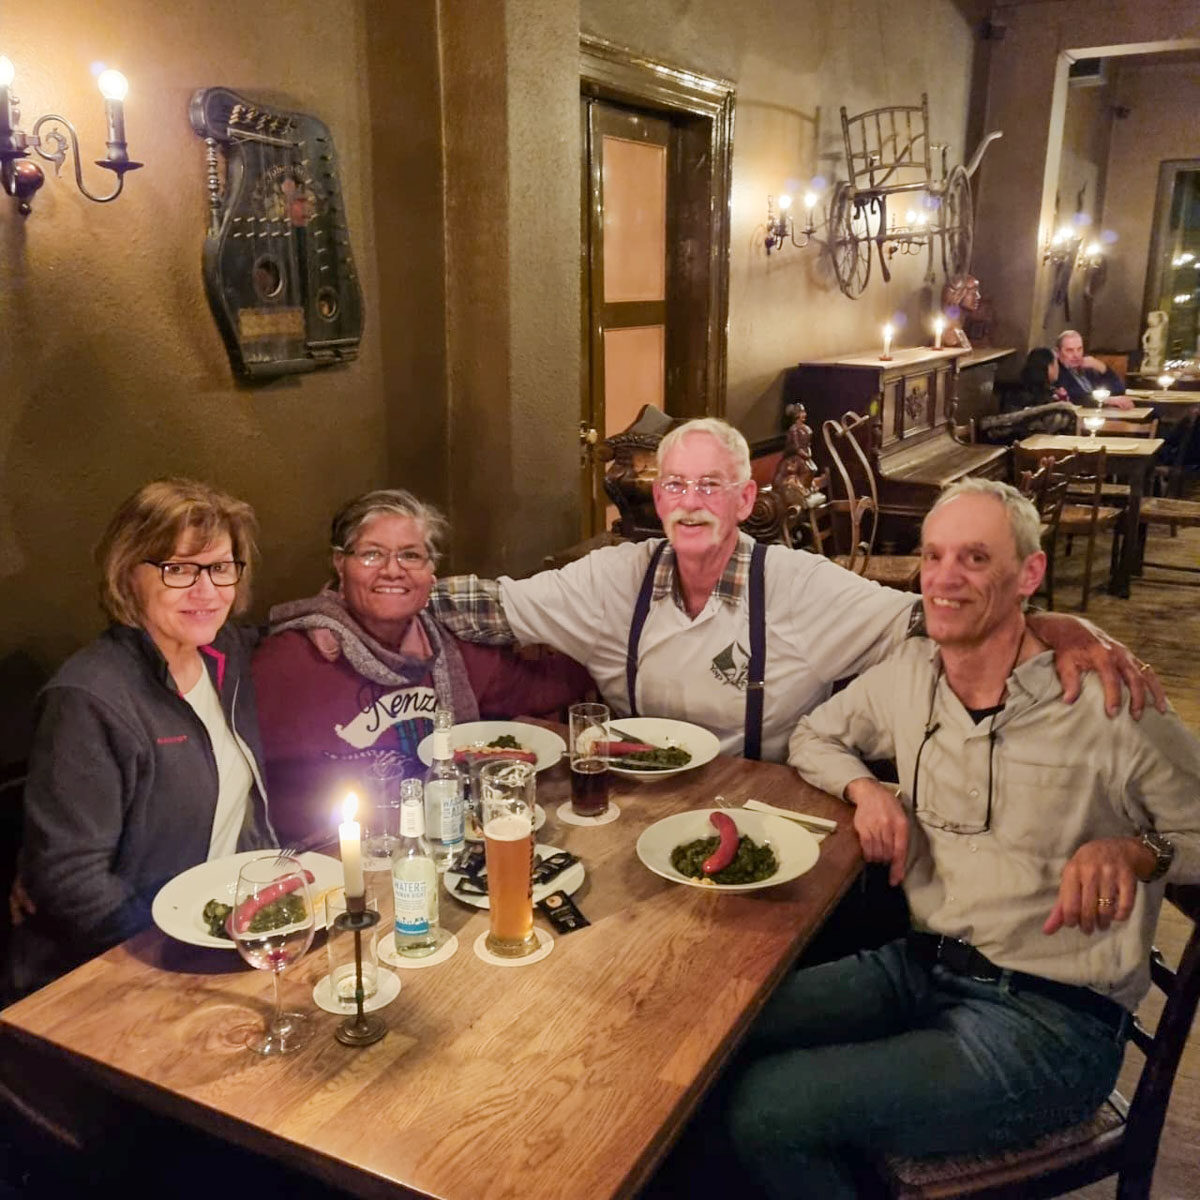 Dinner in an ancient German restaurant with MantaFest Presenter Frank Schneider, his wife Uschi and the Ackers